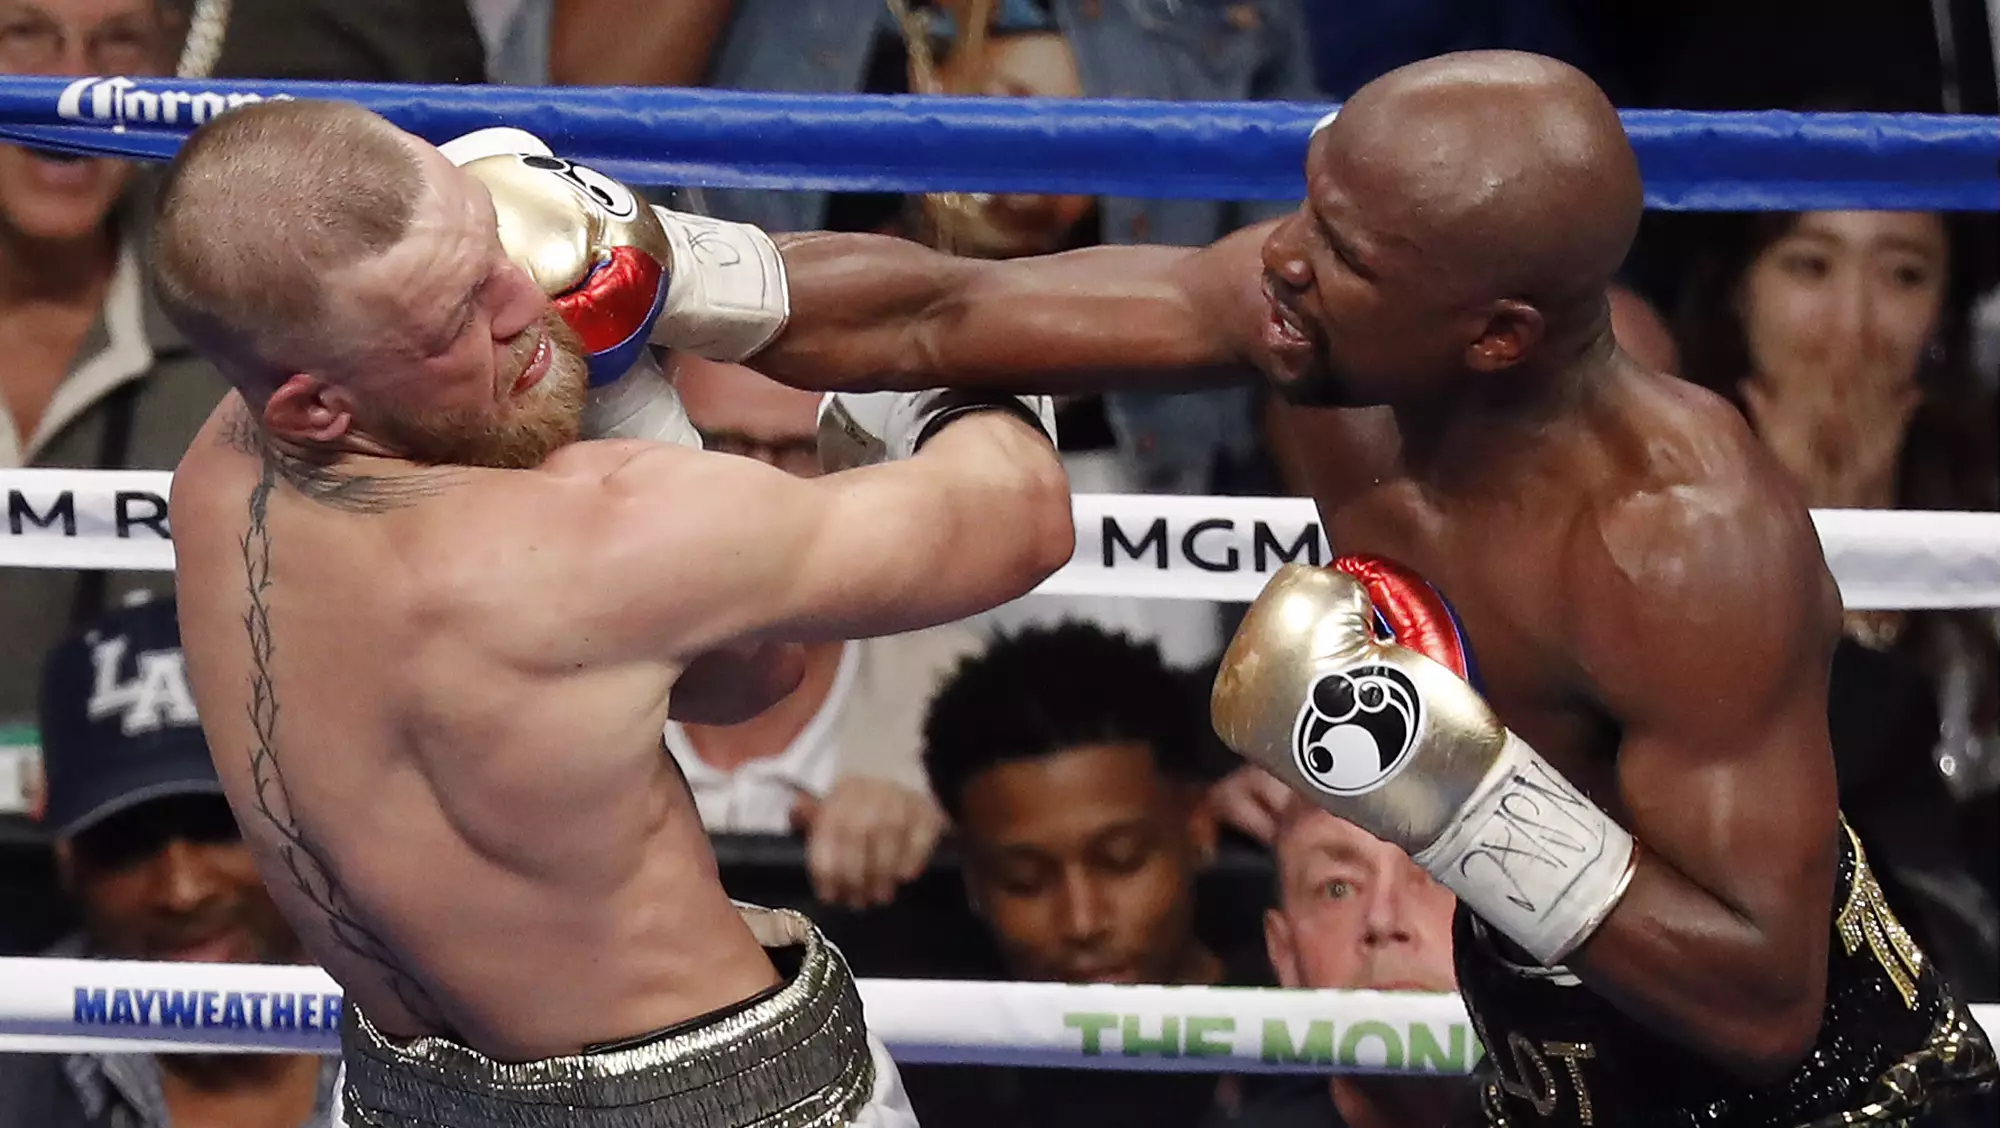 Mayweather 'Did Not Train For McGregor Fight', Says Floyd Snr